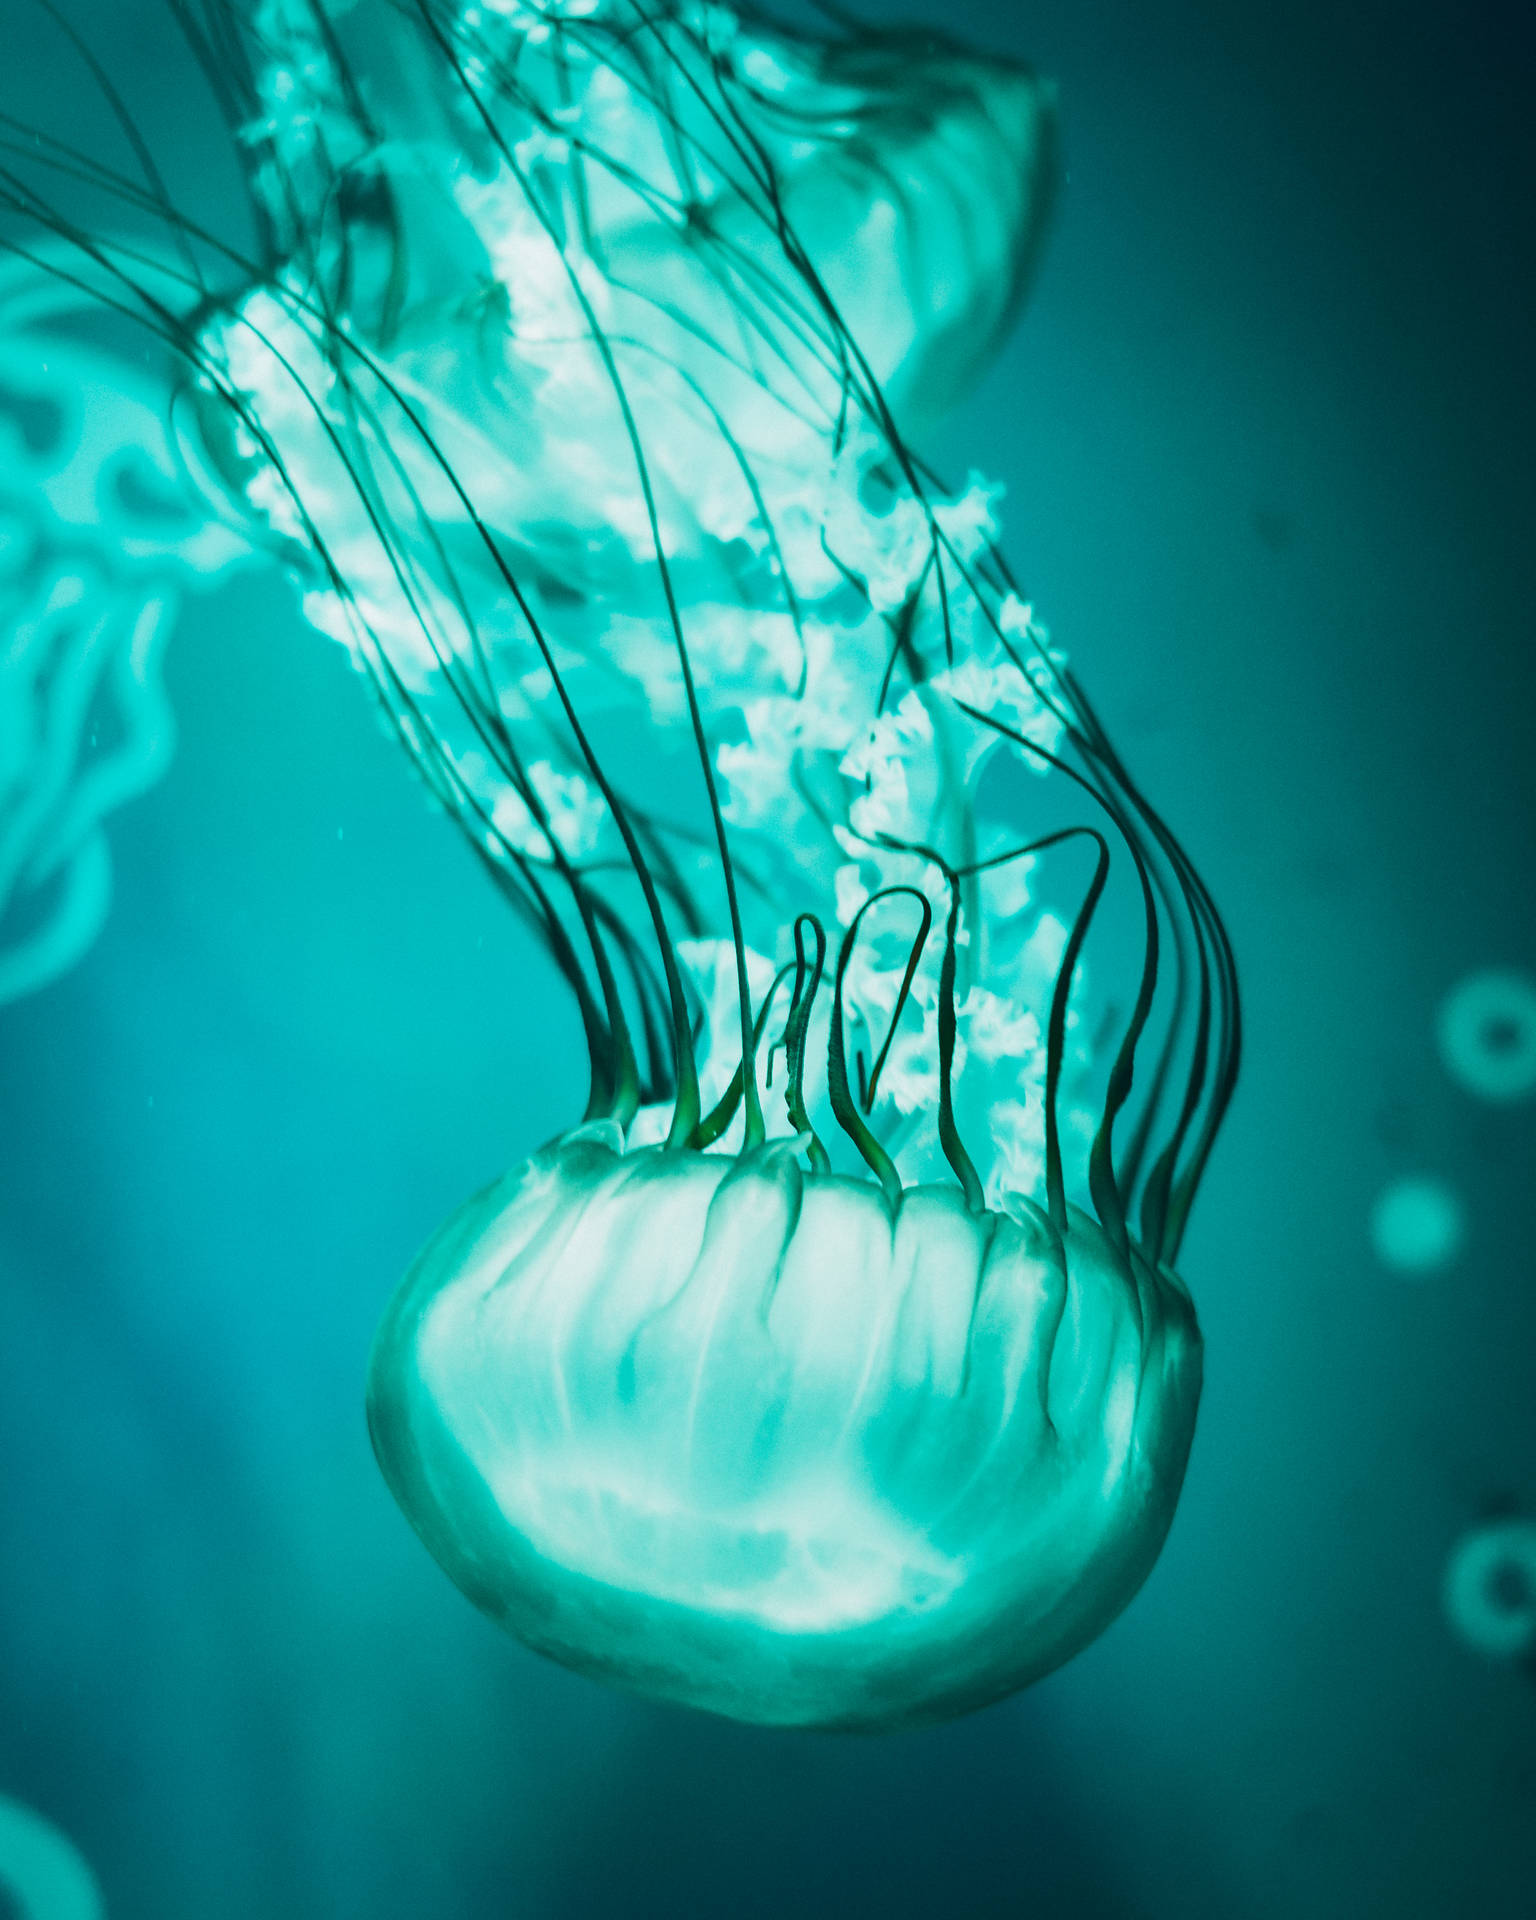 Jellyfish 3376X4220 Wallpaper and Background Image